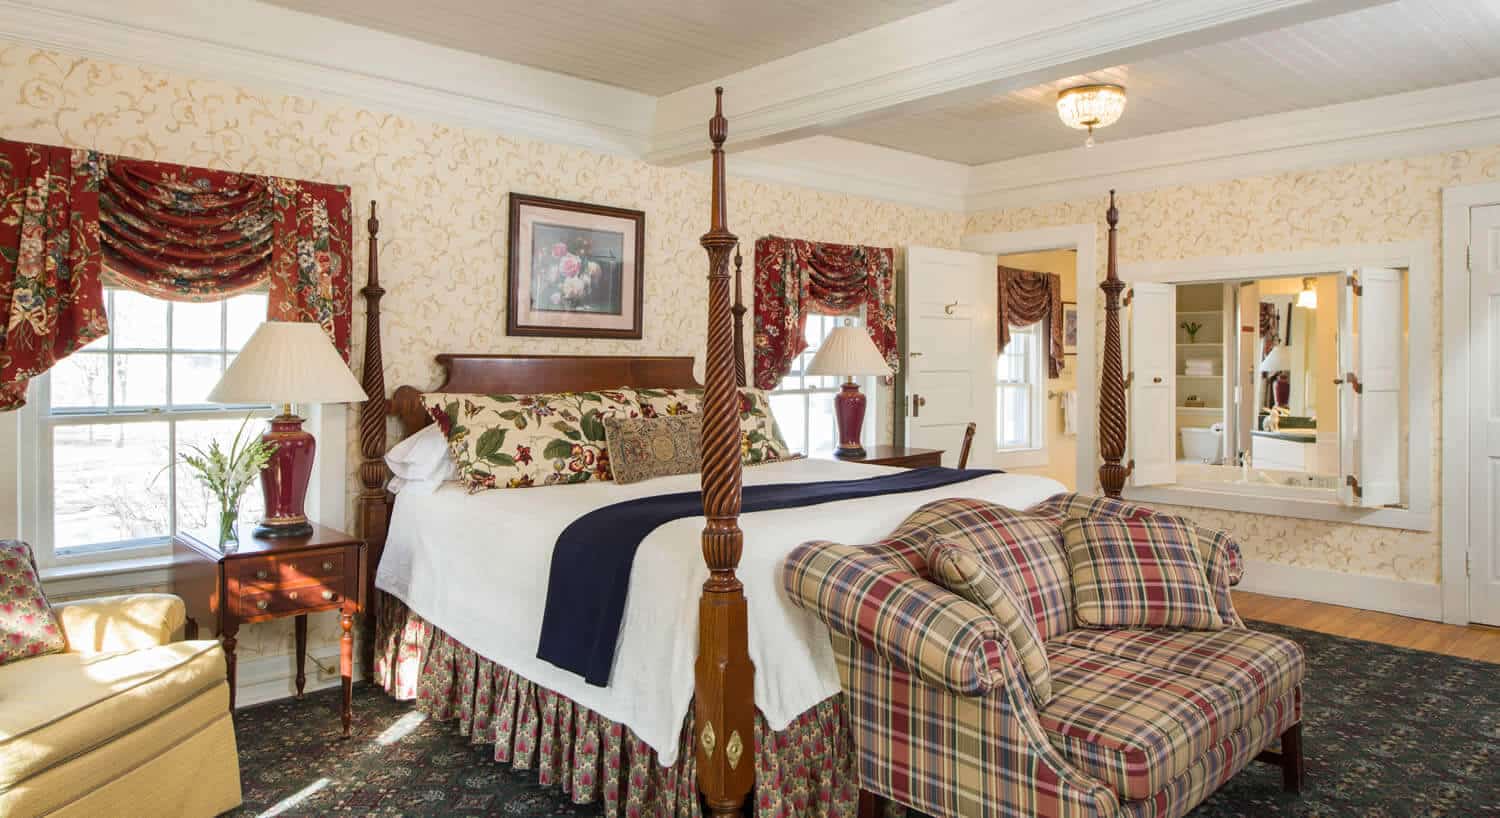 Inn at Ormsby Hill - Lincoln Room with Four Poster Bed